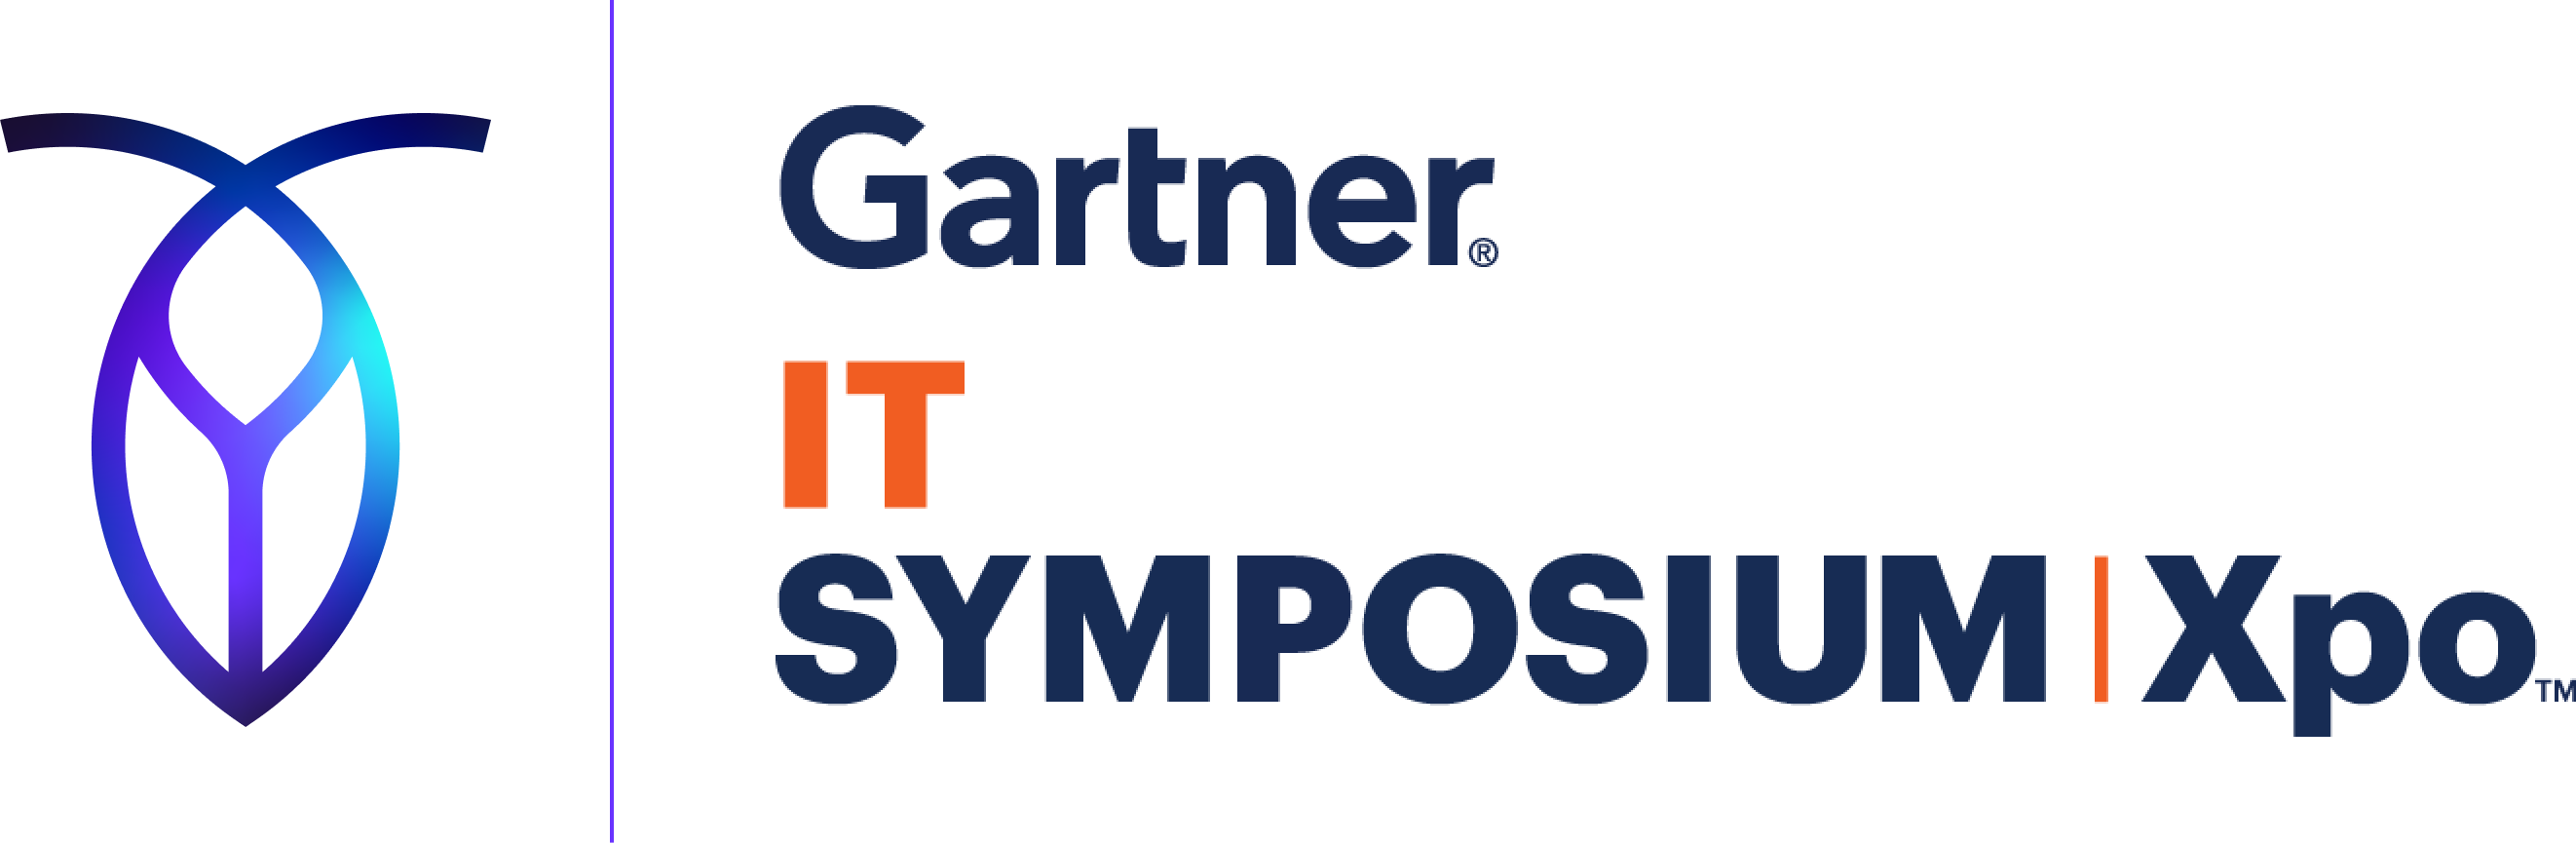 Get to know Cockroach Labs at Gartner IT Symposium